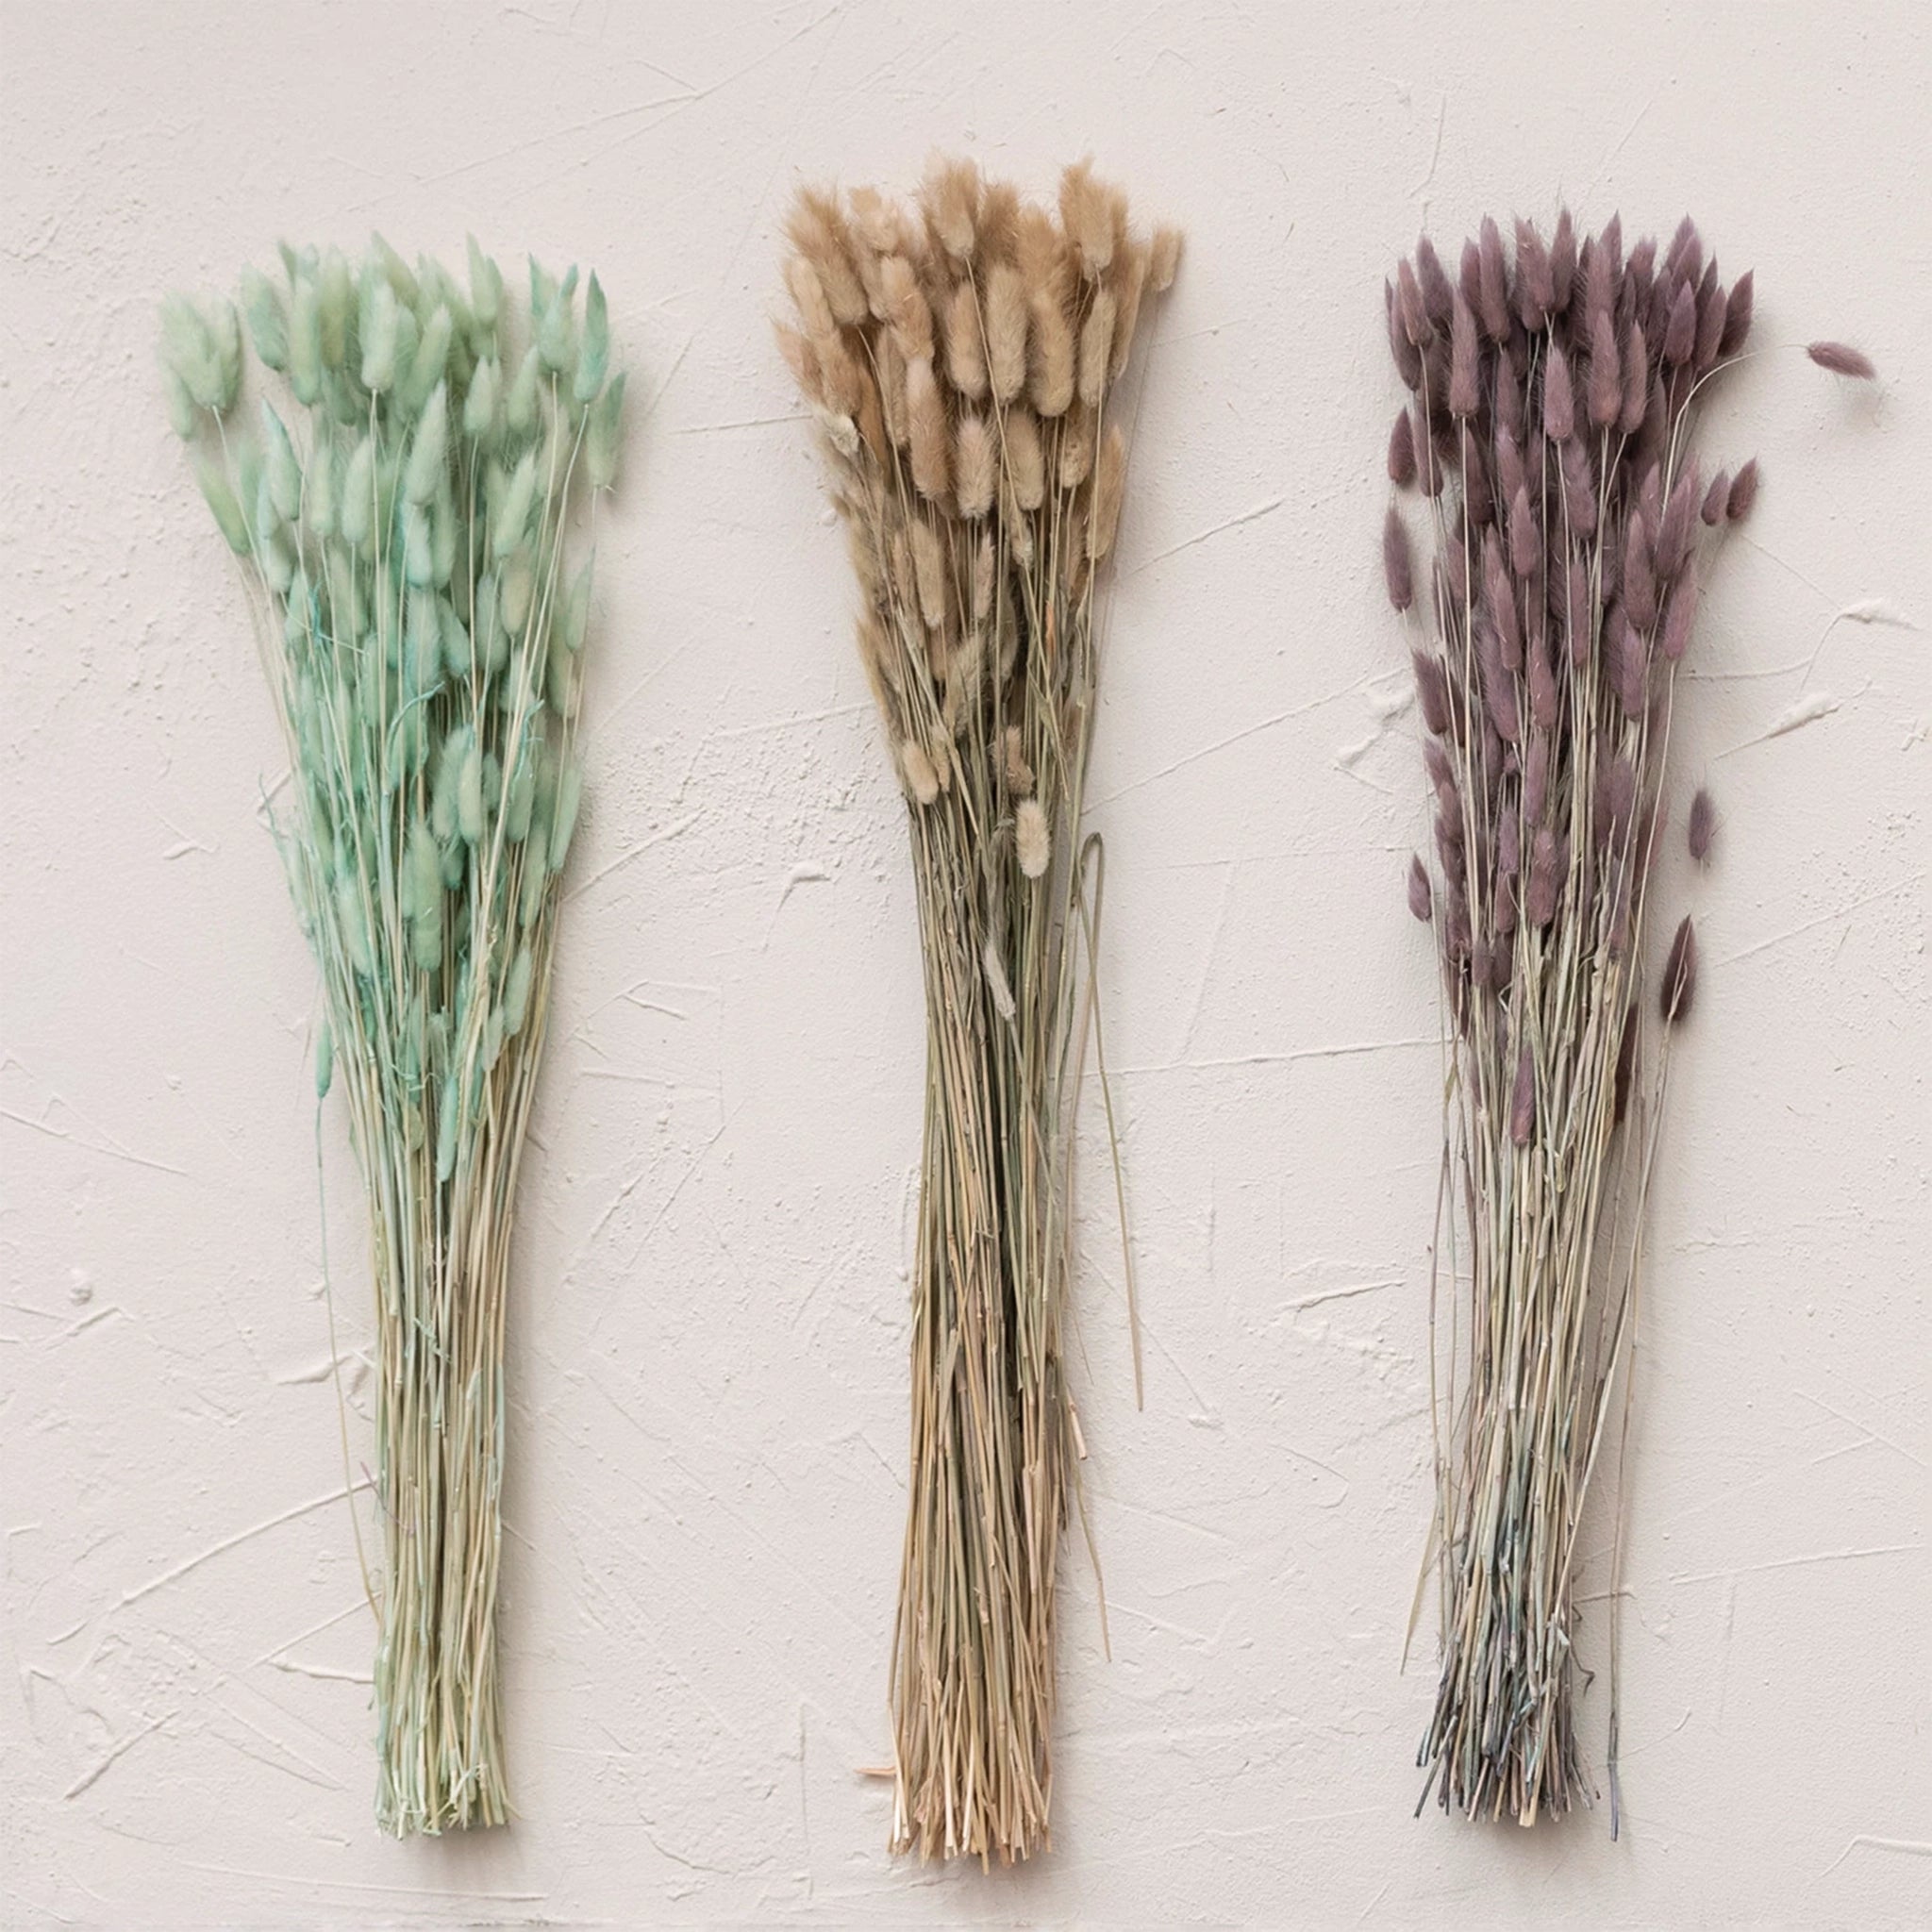 A bundle of dried bunny tails in a lavender shade photographed with the other shades we carry on our website in pink, natural and mint.